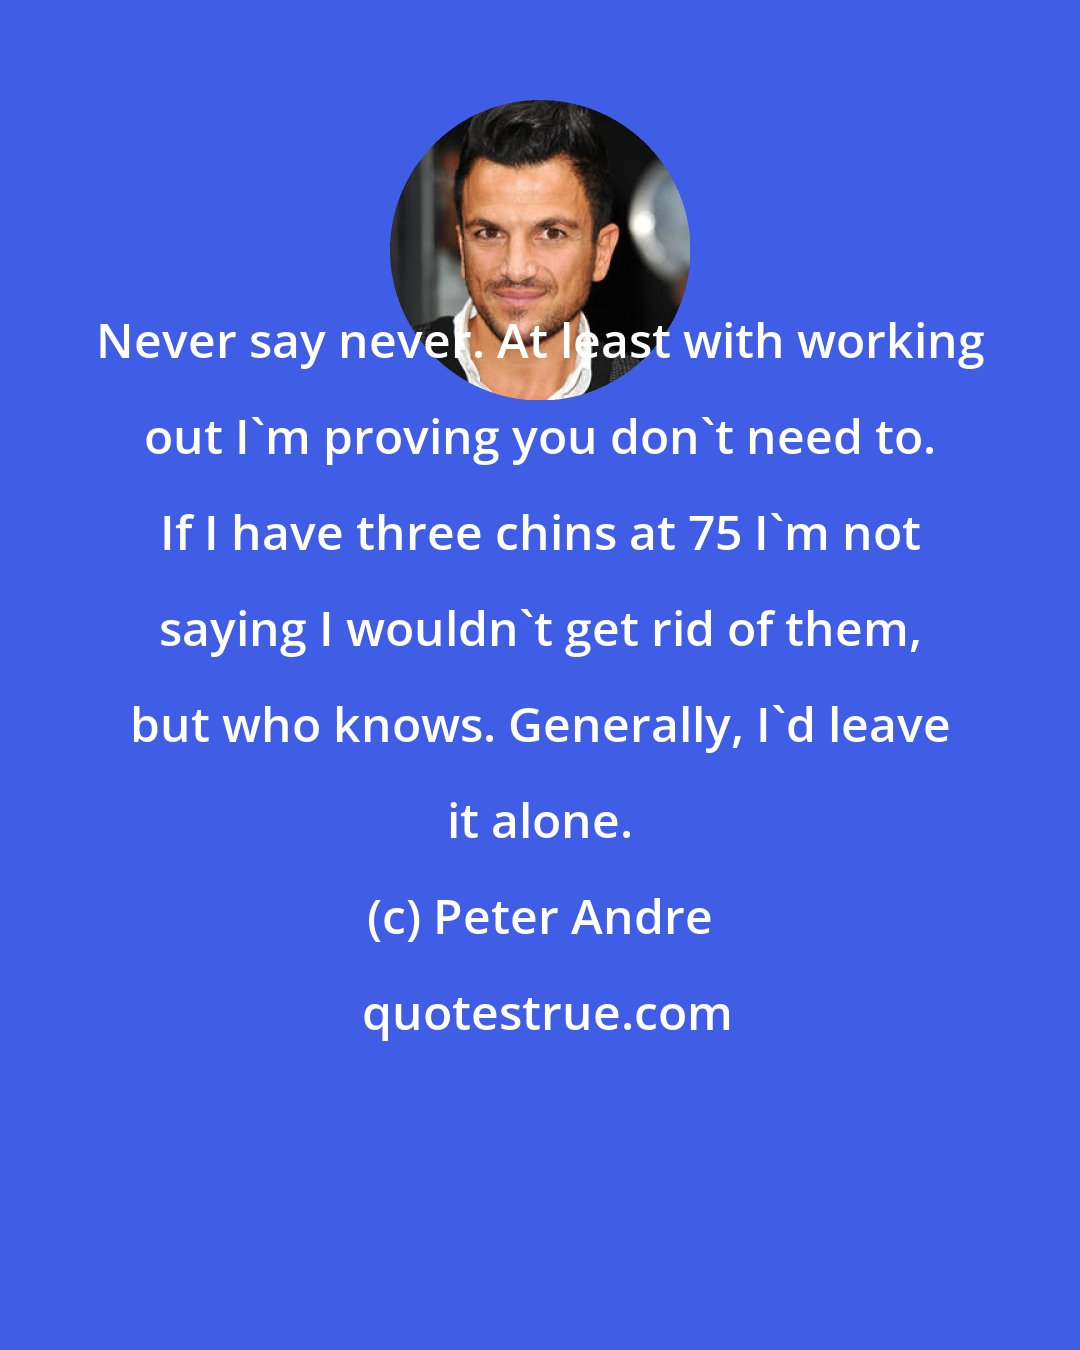 Peter Andre: Never say never. At least with working out I'm proving you don't need to. If I have three chins at 75 I'm not saying I wouldn't get rid of them, but who knows. Generally, I'd leave it alone.